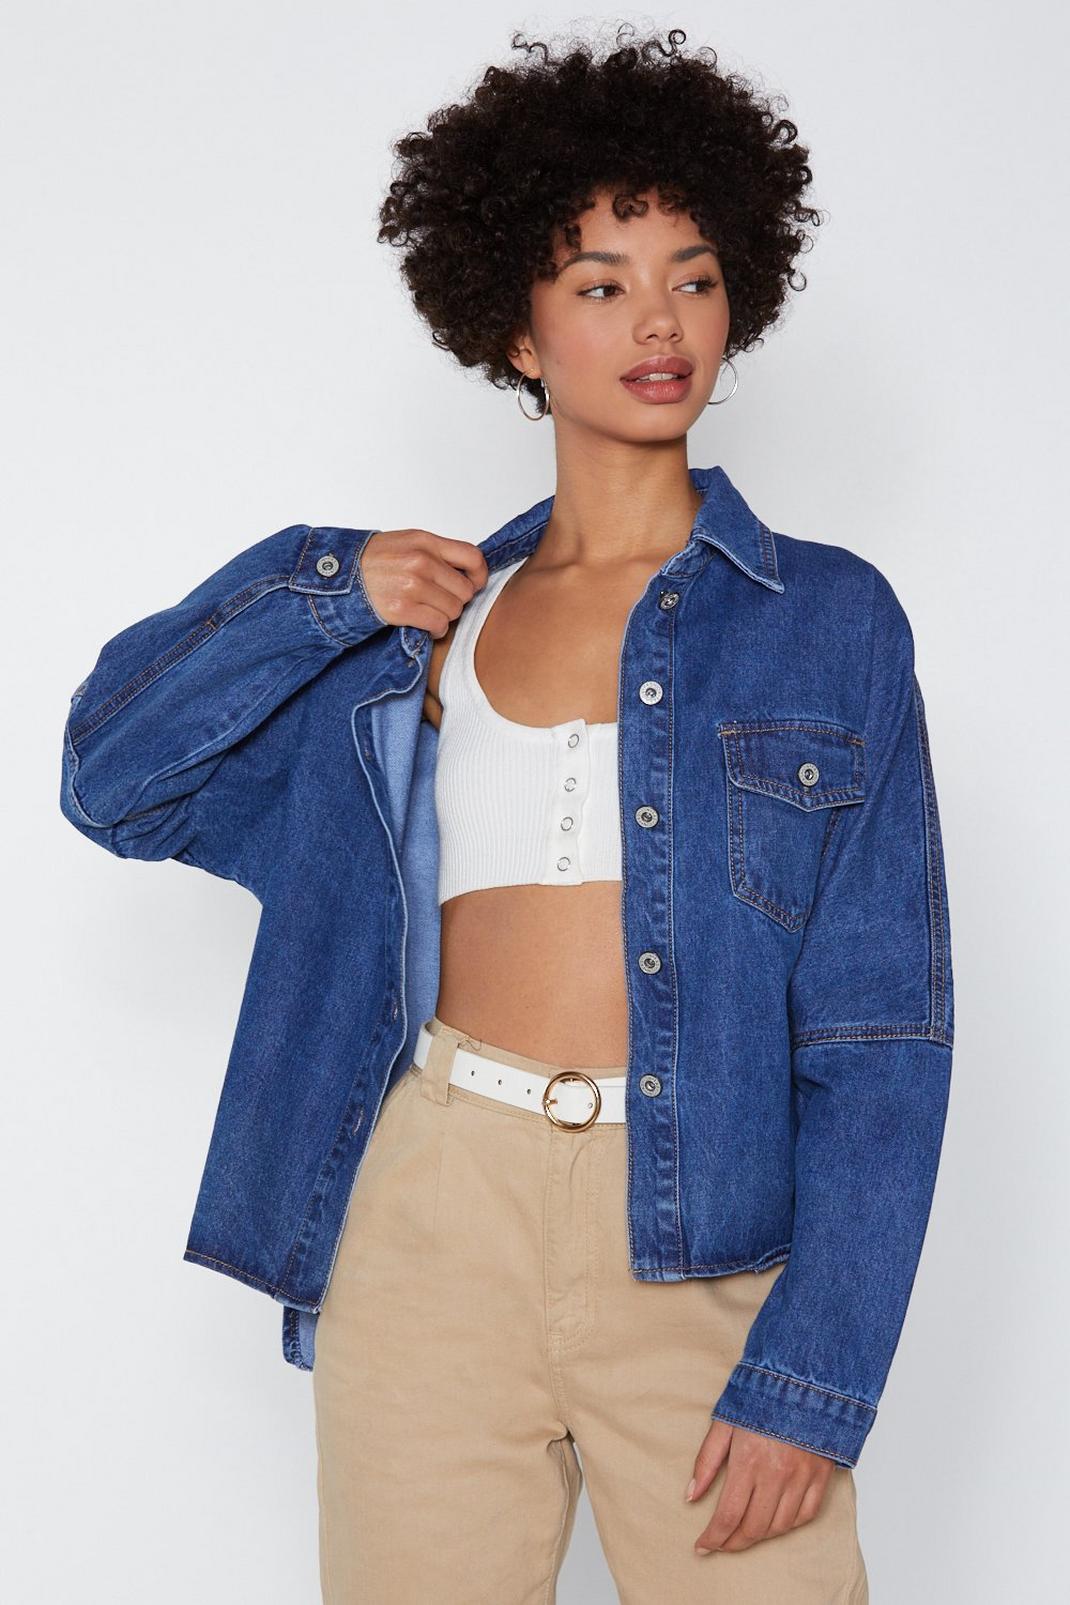 Meet You There Denim Jacket image number 1